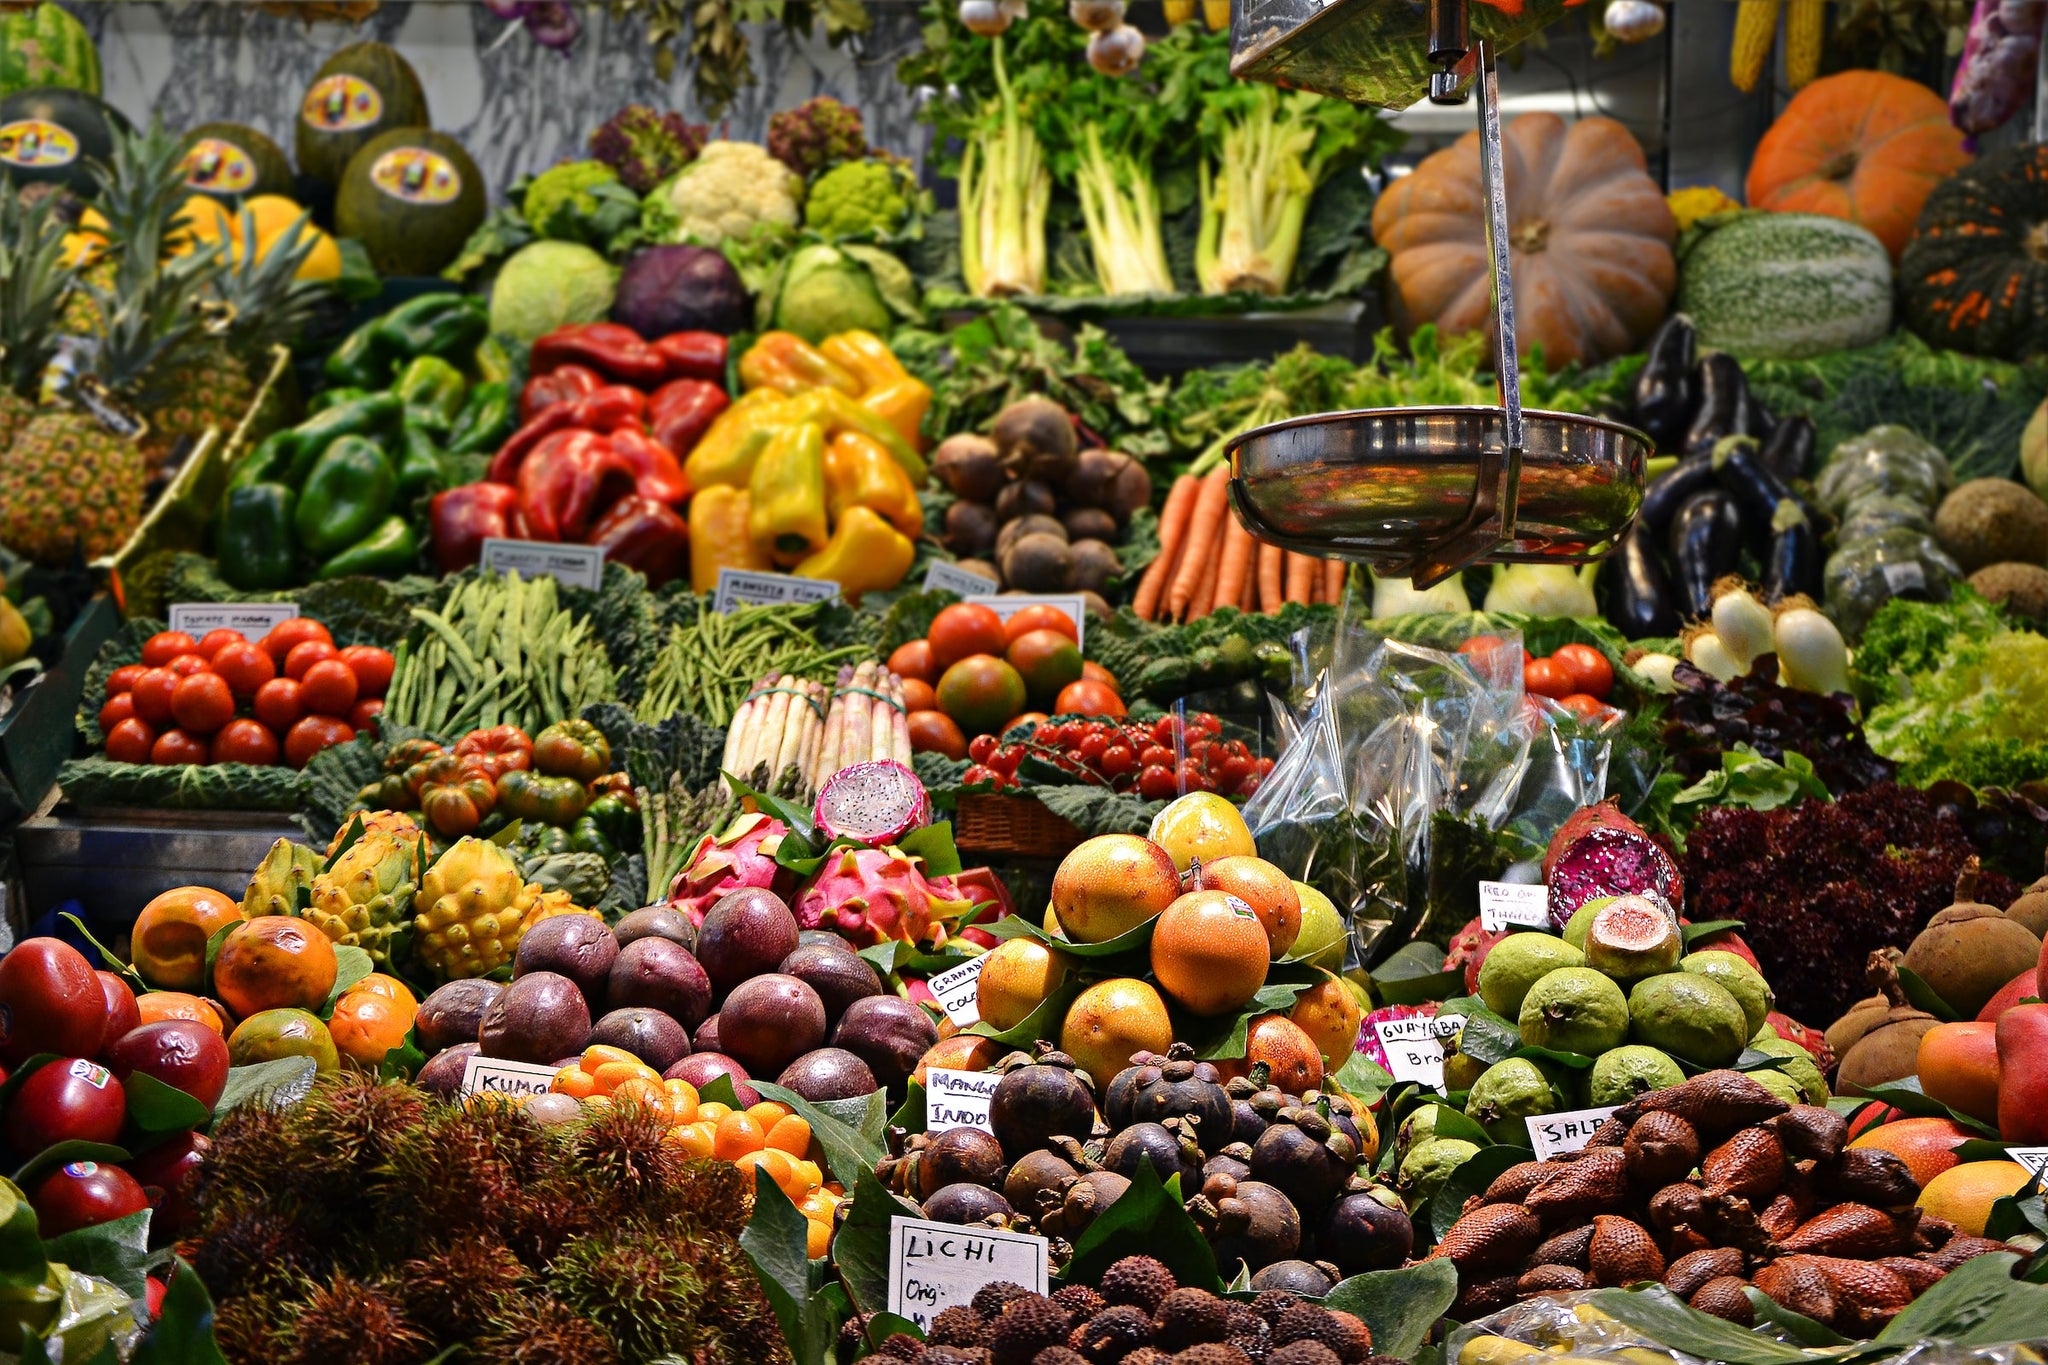 It's National Organic Month. How to Introduce More Organic Food in Restaurants?